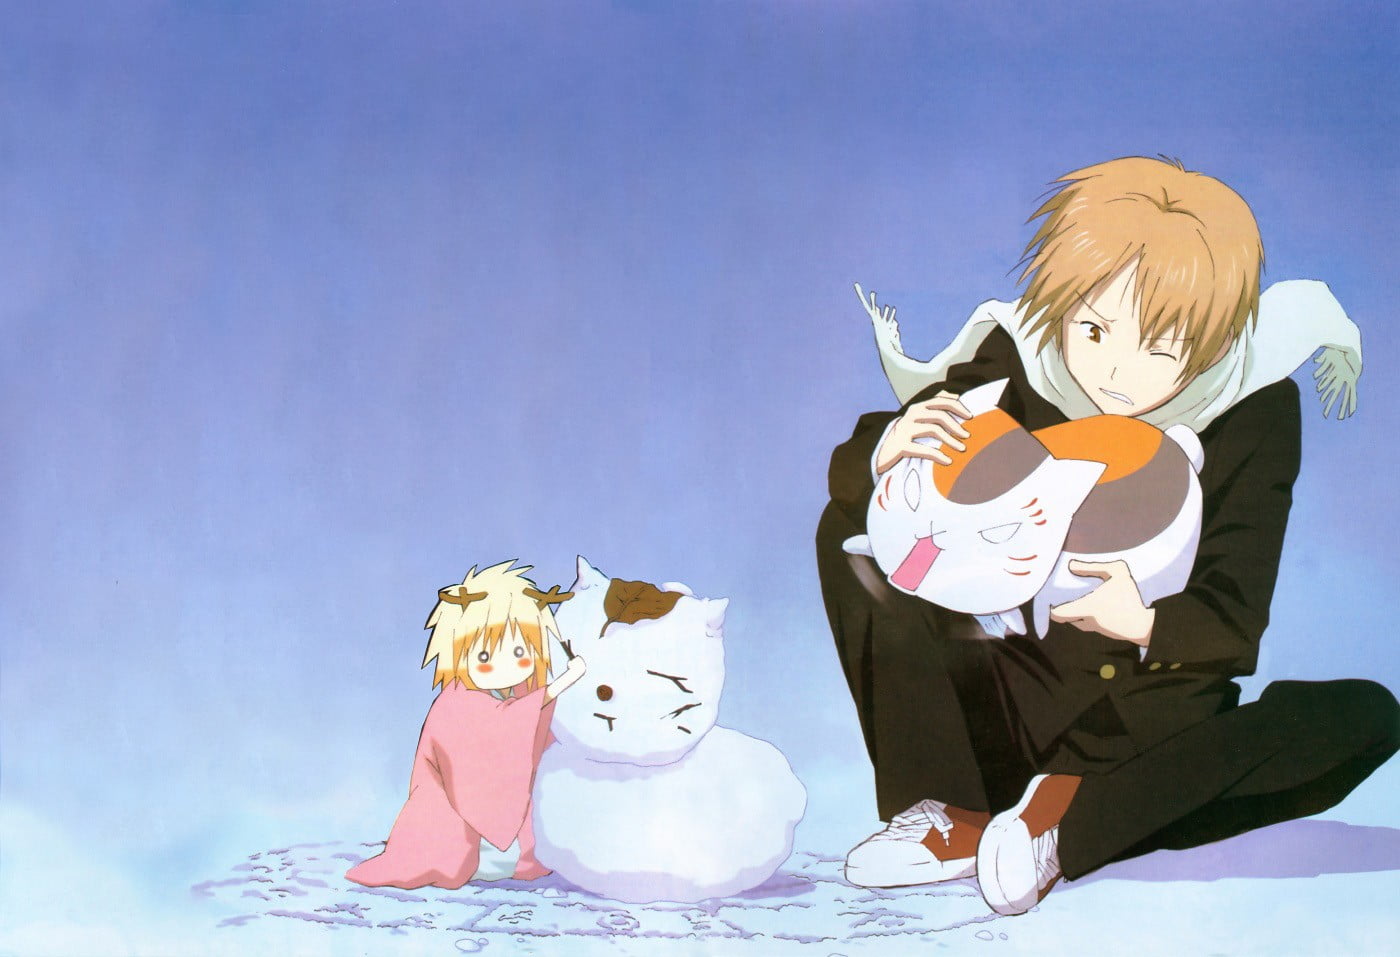 Man Holding Cat Anime Illustration Natsume Book Of Friends Images, Photos, Reviews